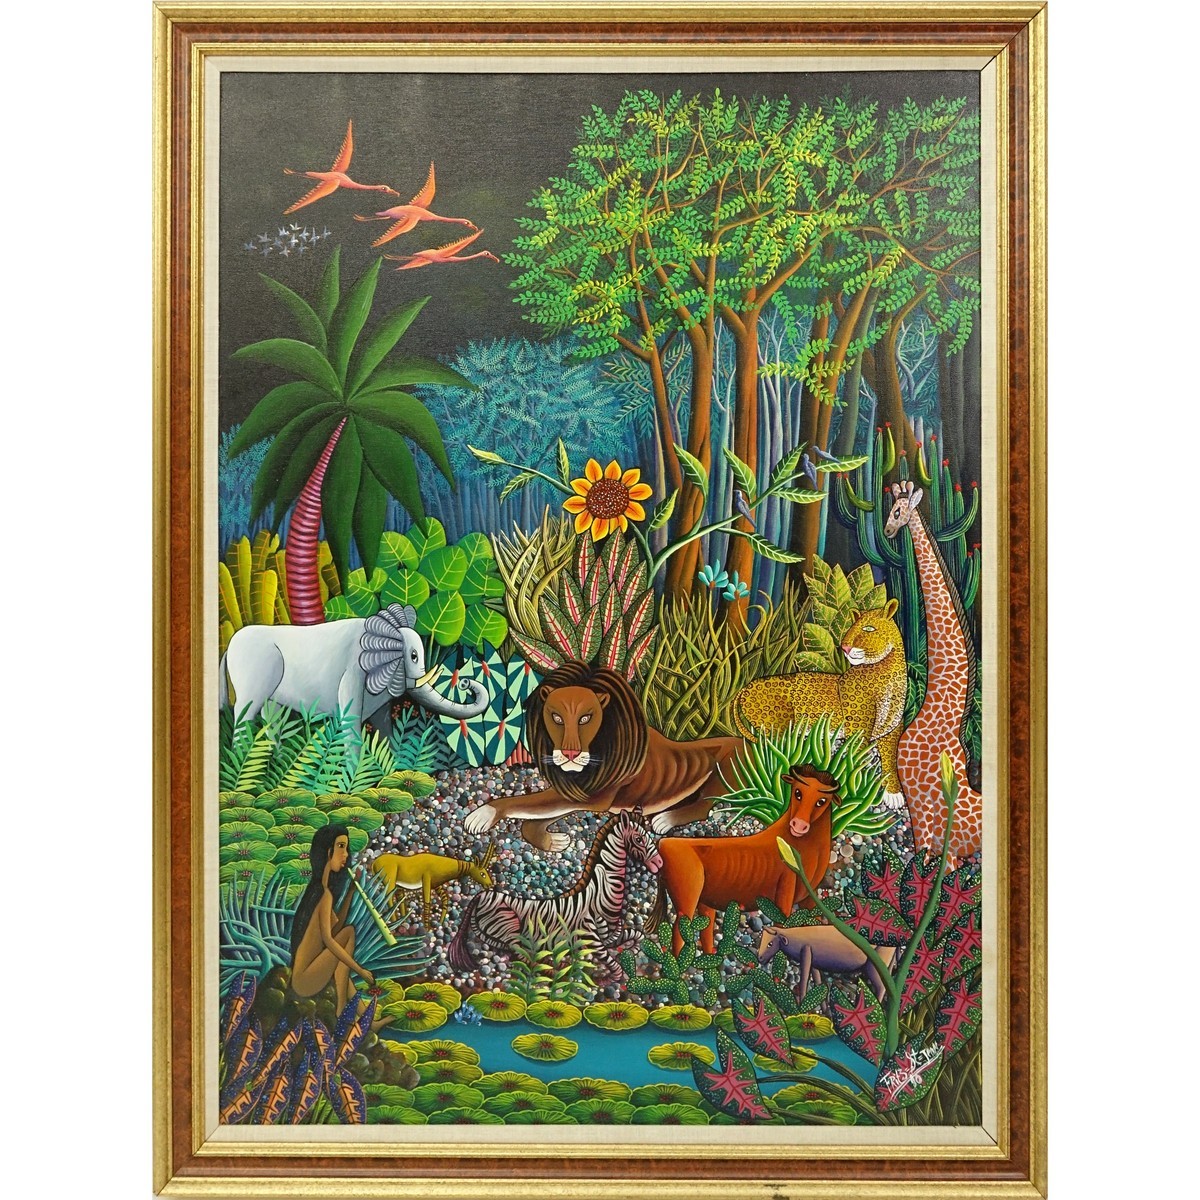 Fritz Saint-Jean, Haitian  (20th C) Oil on Canvas, Jungle Scene with Animals, Signed and Dated 1990 Lower Right. Artist information attached en verso.